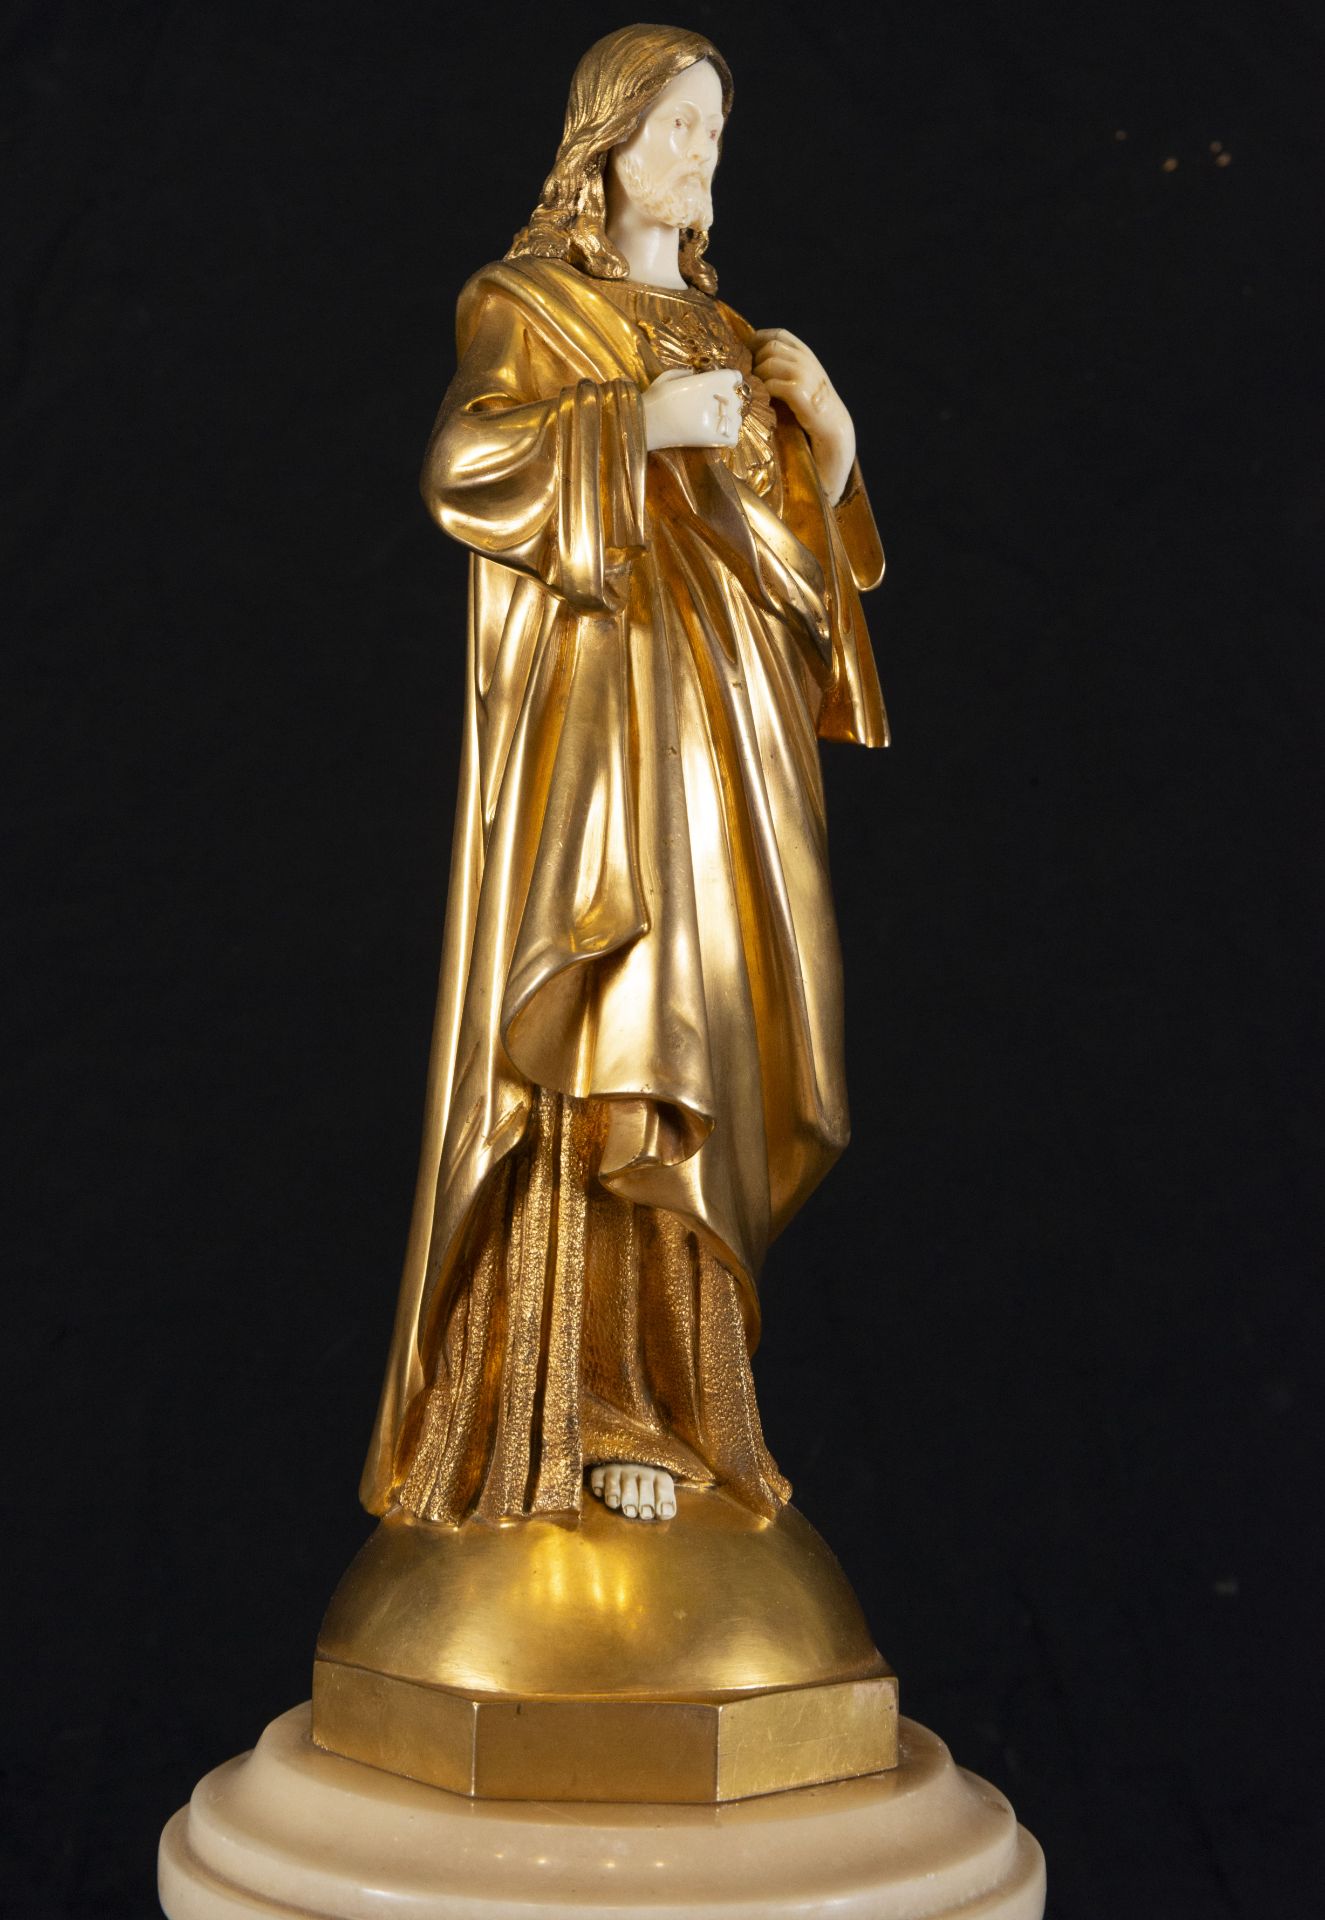 Beautiful Chryselephantine Sculpture from the Art Nouveau period representing the Sacred Heart of Je - Image 2 of 3